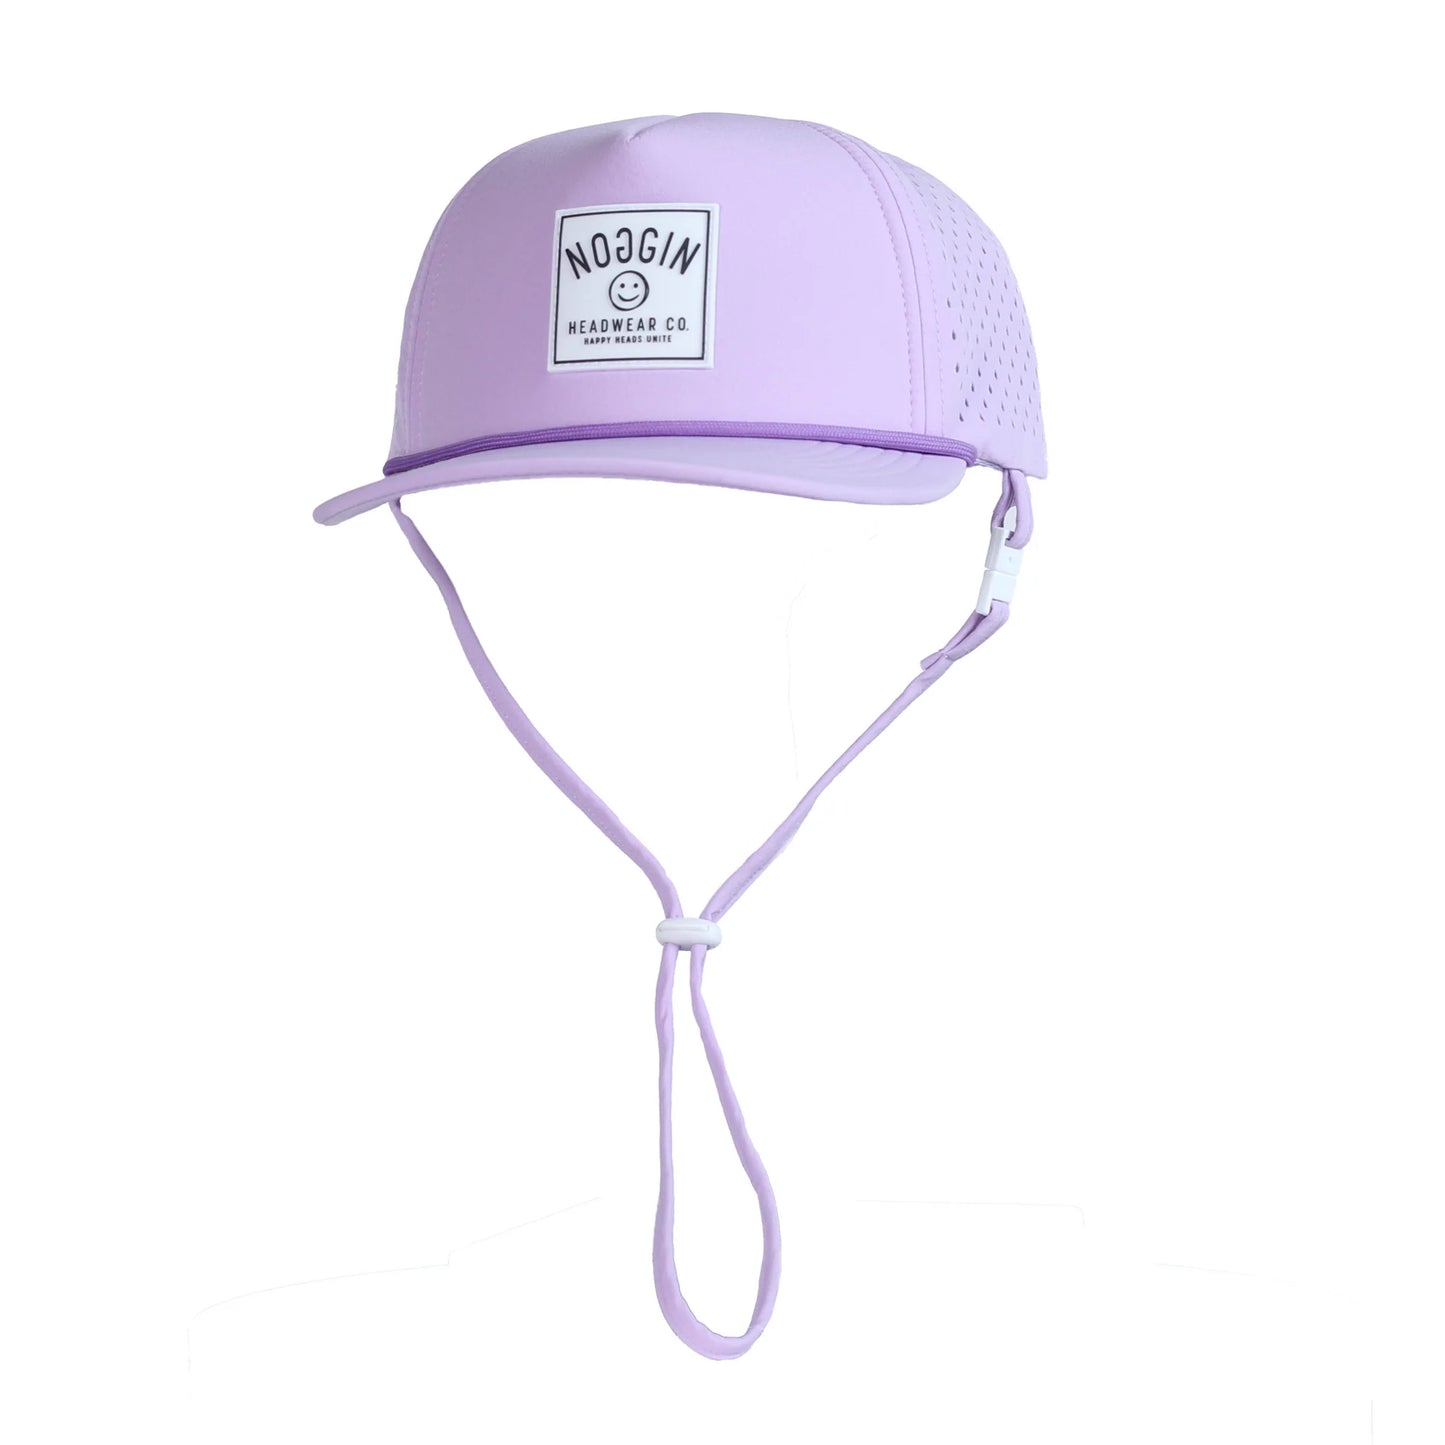 The Saylor Hat